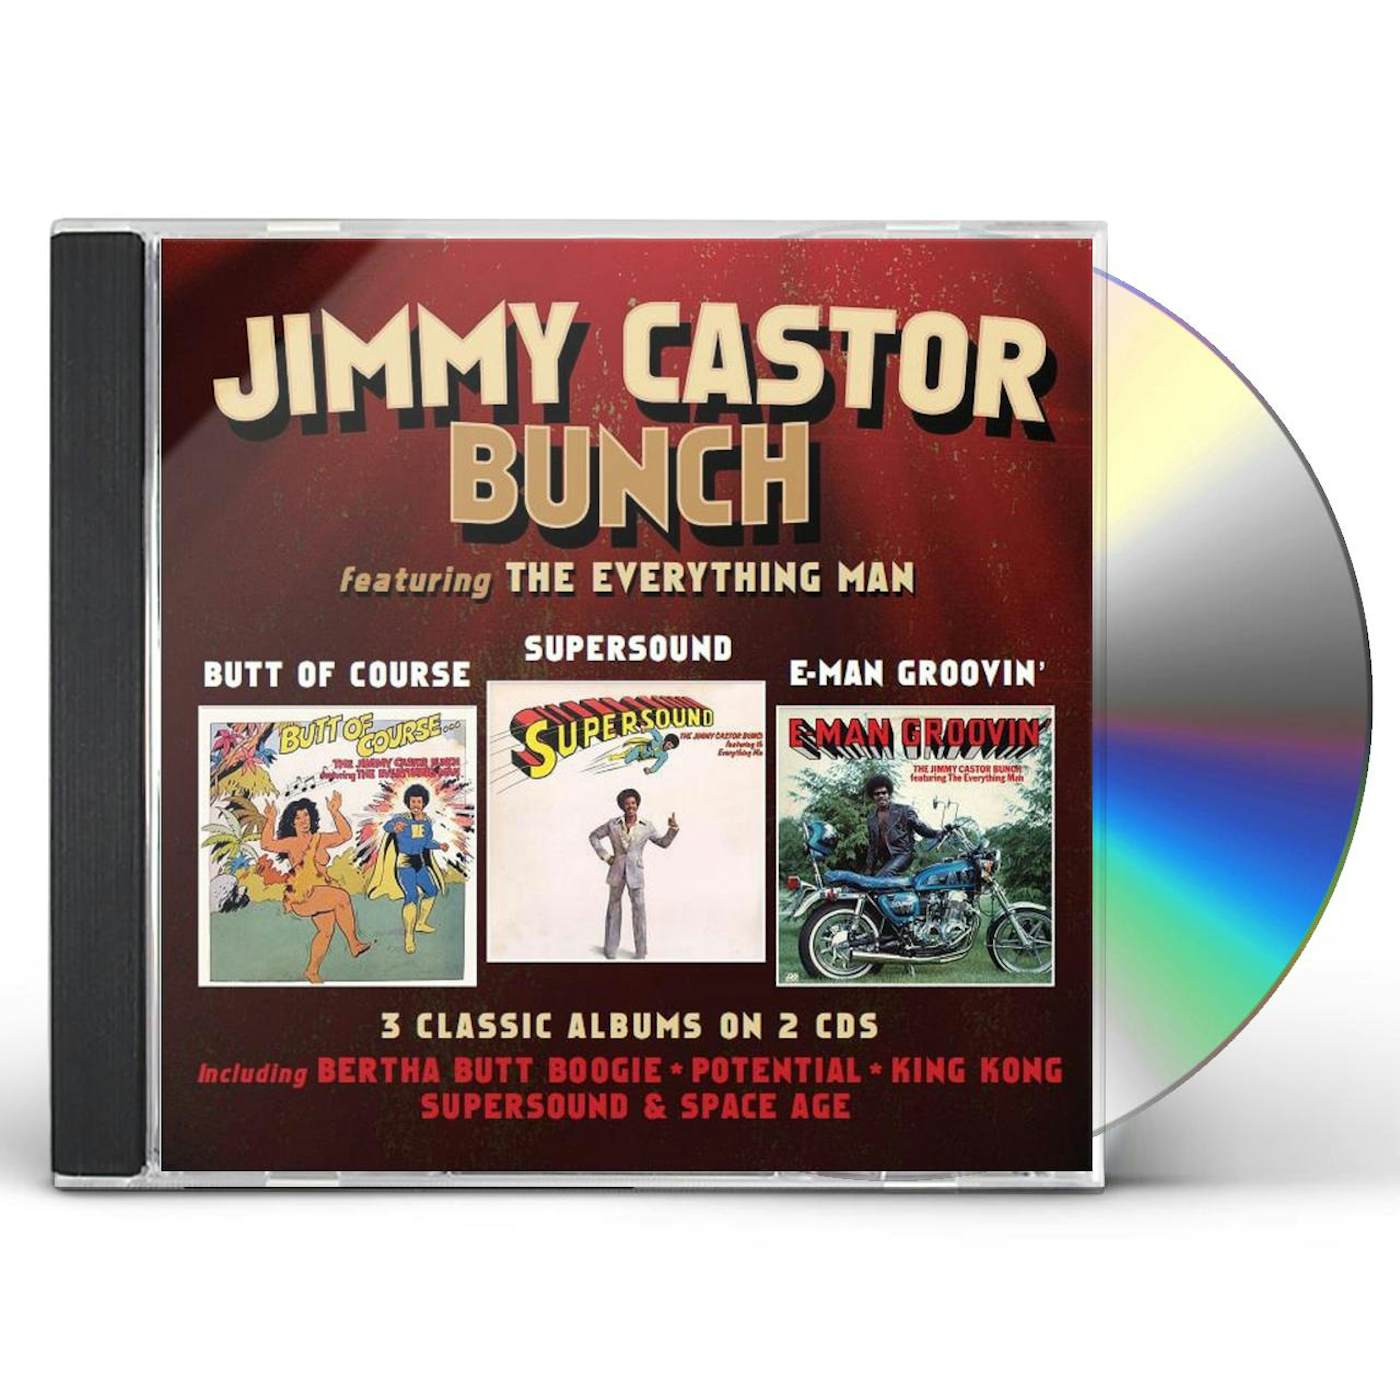 The Jimmy Castor Bunch BUTT OF COURSE / SUPERSOUND / E-MAN GROOVIN CD